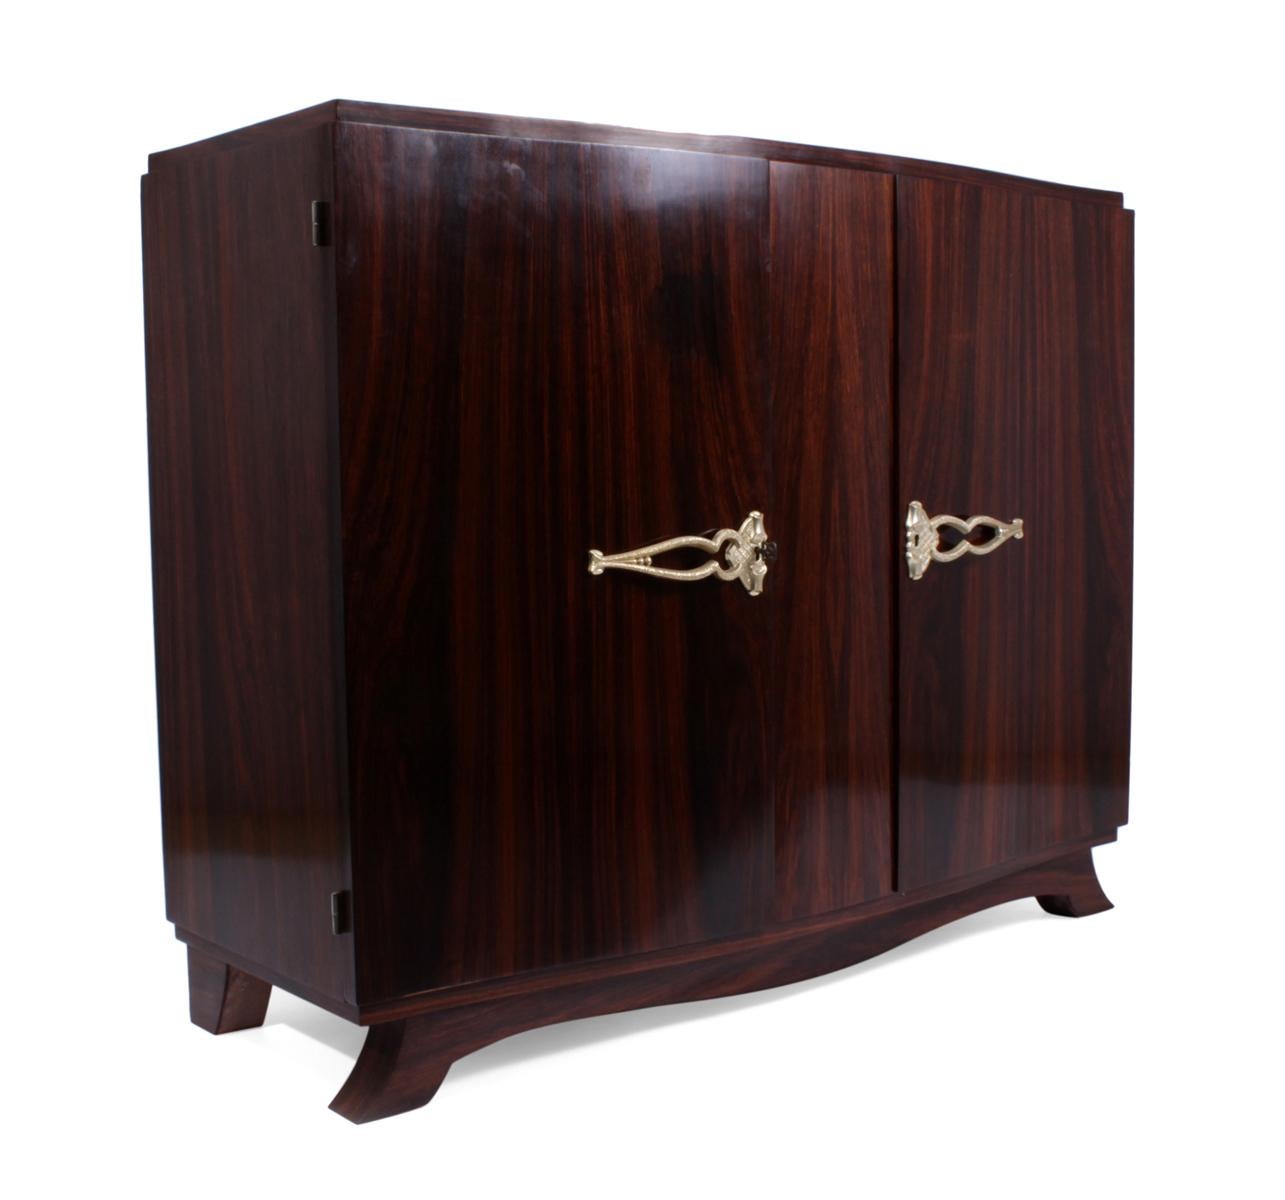 Mid-20th Century French Art Deco Sideboard in Rosewood, circa 1930